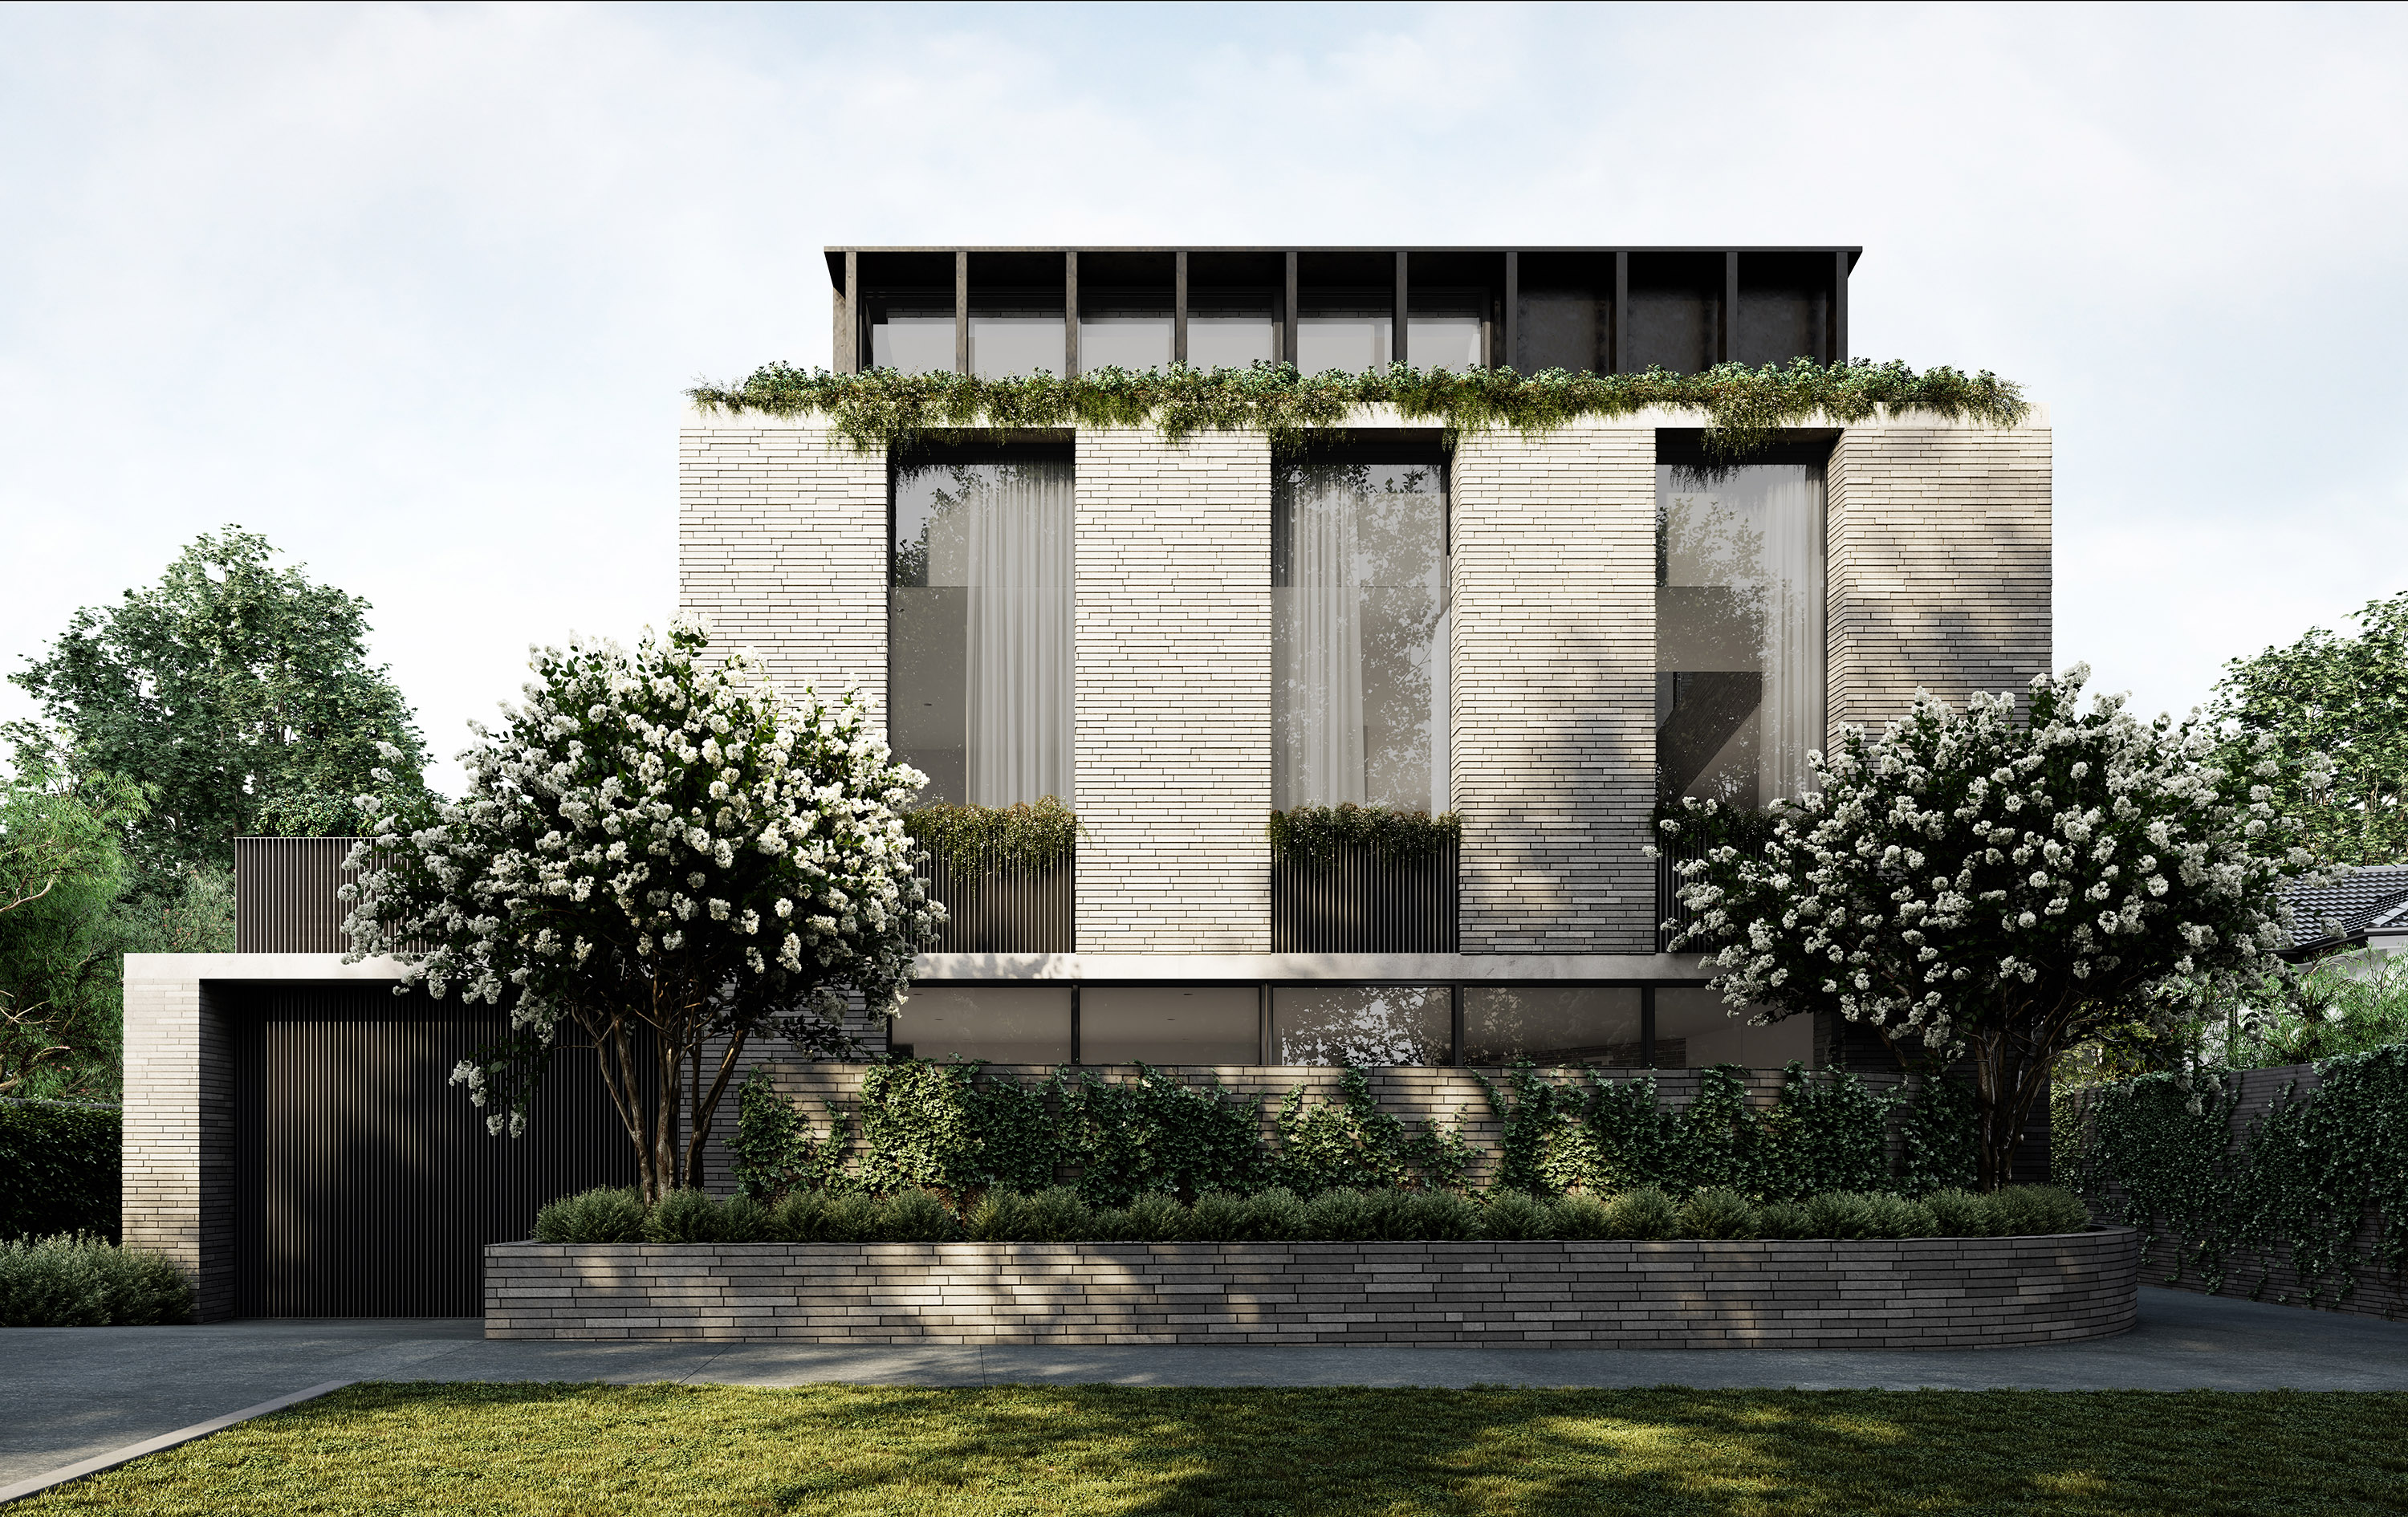 Toorak project has fashionable pedigree linked to KITX founder Kit Willow